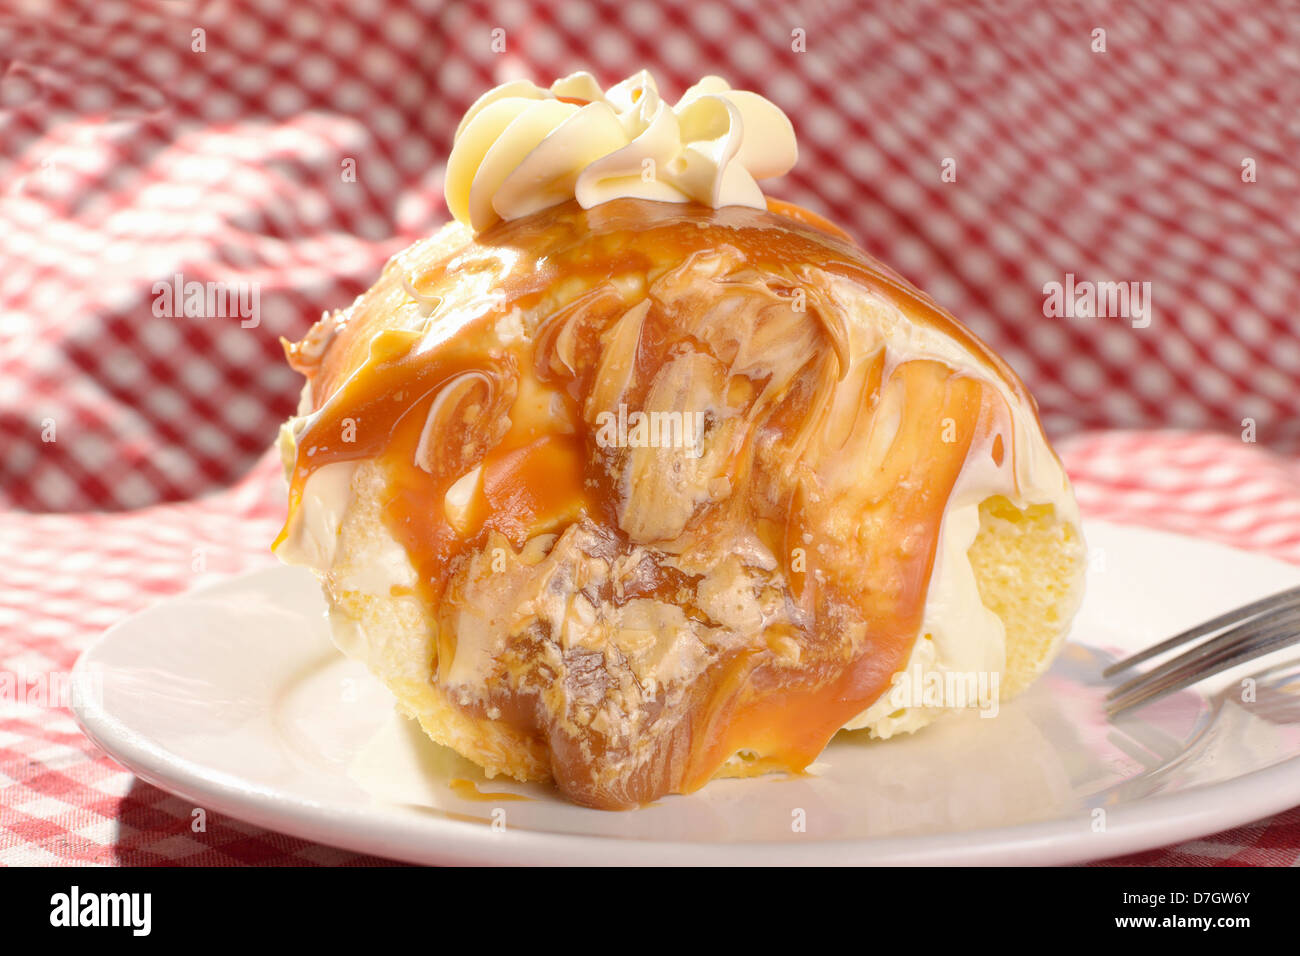 mouth-watering slice of dulce de leche roll with vanilla buttercream icing on top and caramel filling. Stock Photo